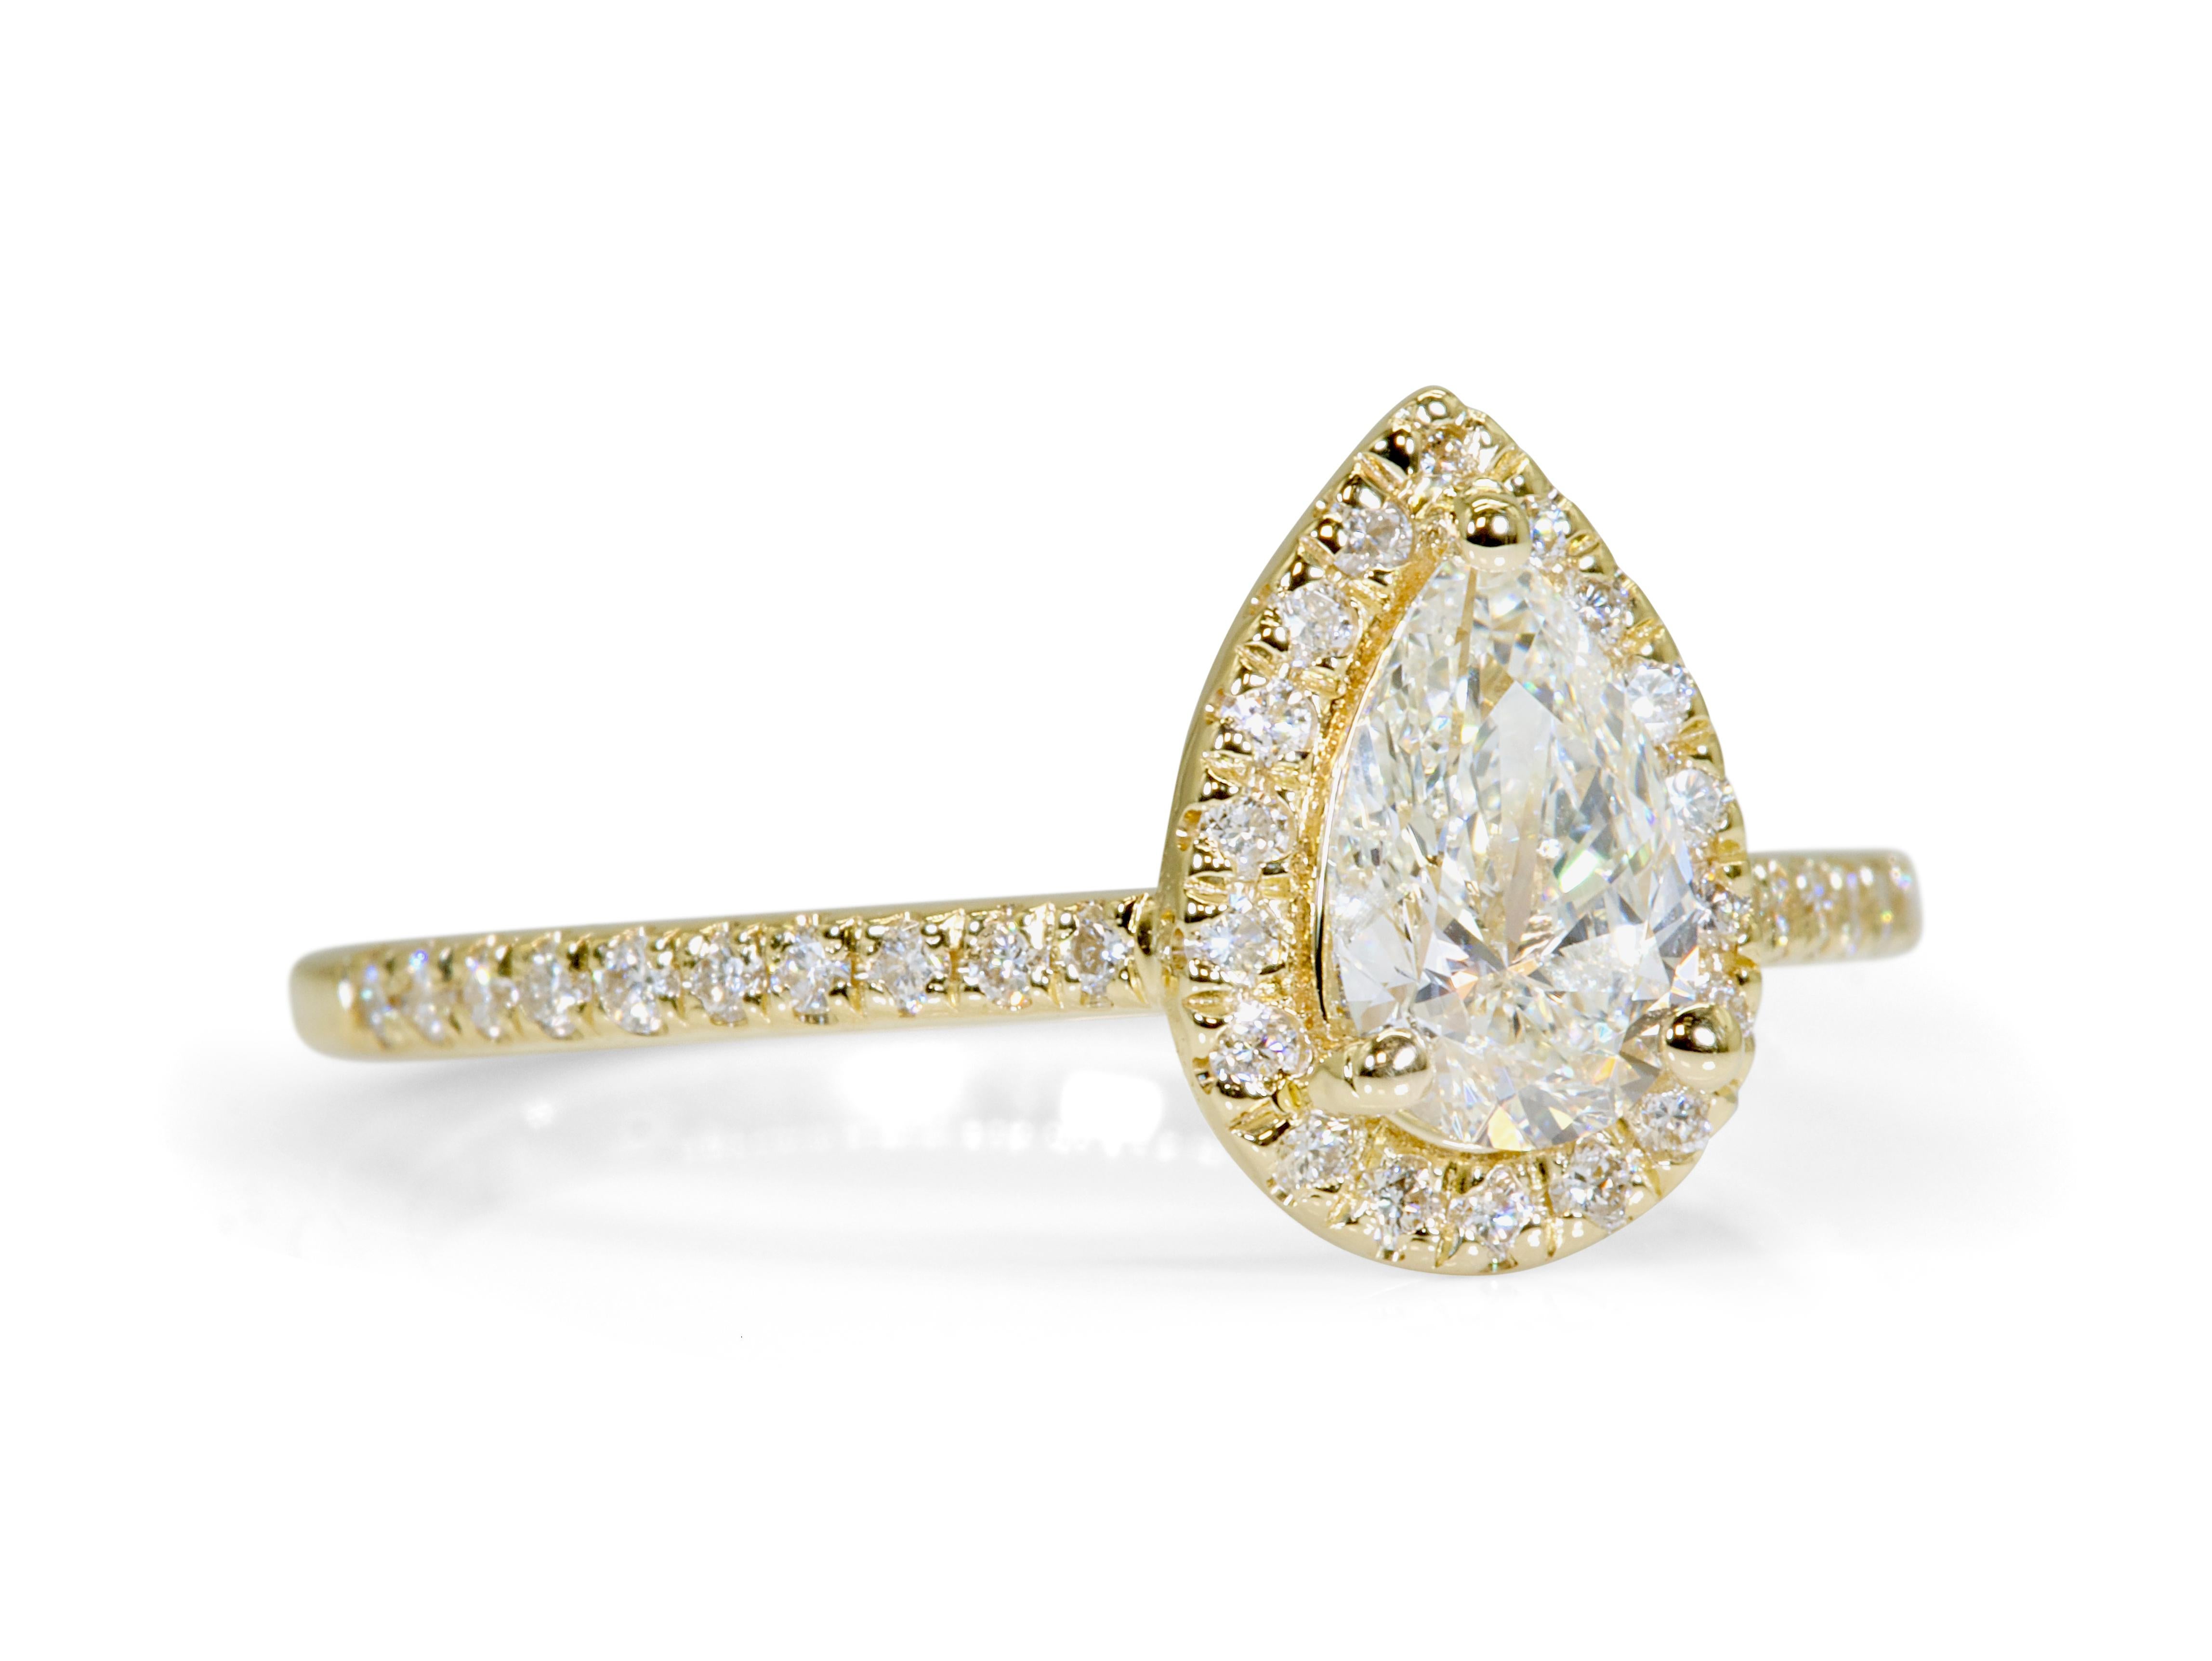 Women's Dazzling 2.66ct Pear-Shaped Diamond Halo Ring in 18k Yellow Gold - GIA Certified For Sale